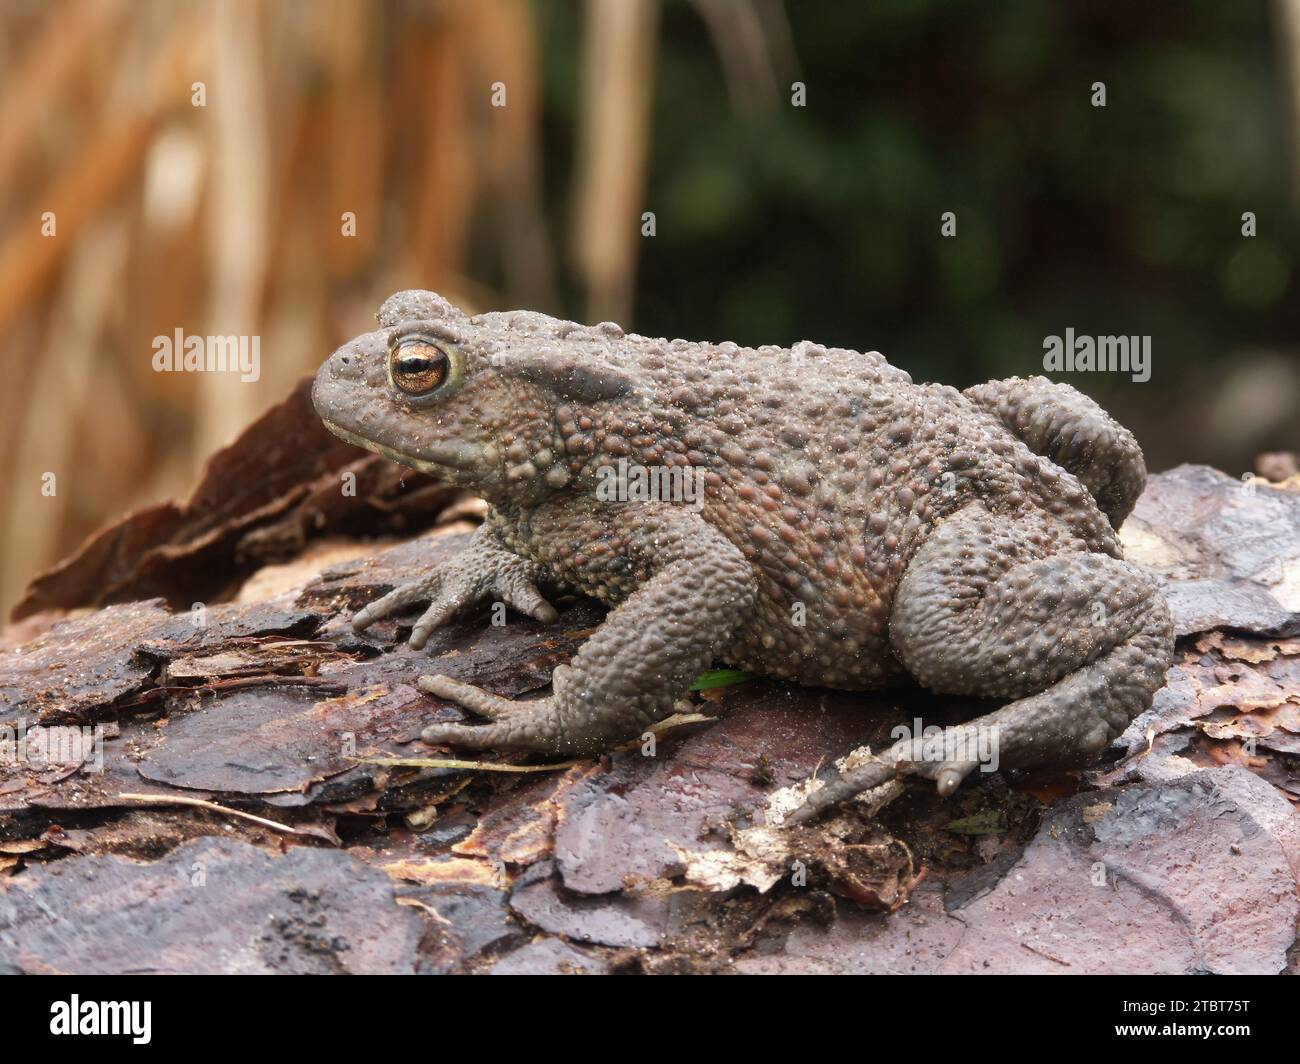 Natural closeup on a female Common European toad, Bufo bufo from the garden Stock Photo